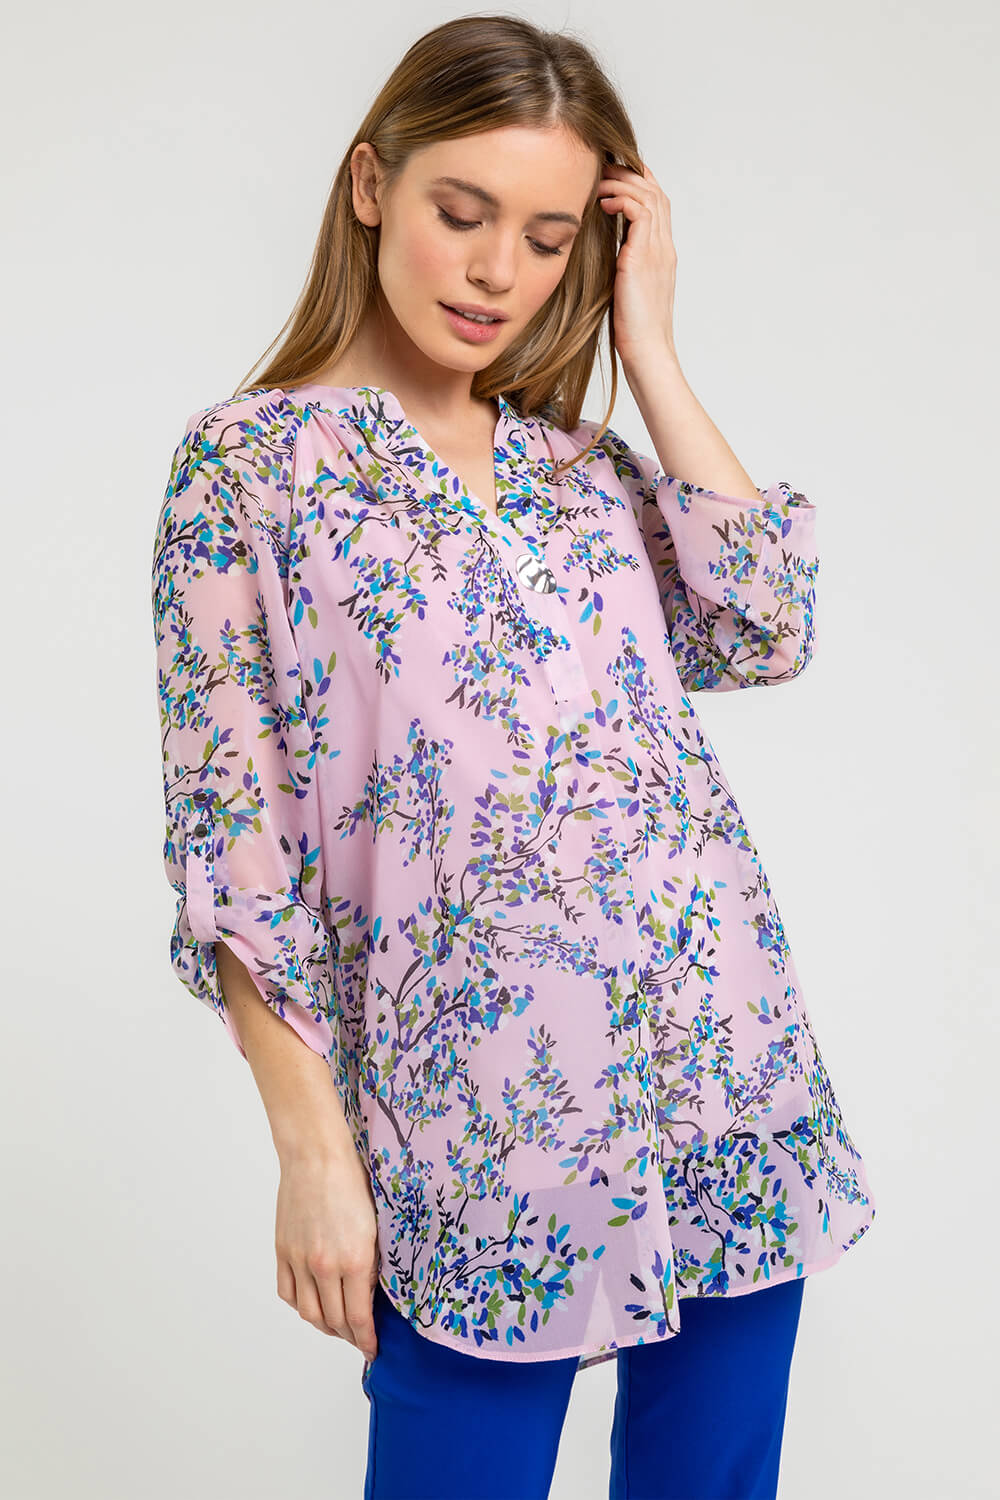 PINK Petite Ditsy Floral Button Detail Top, Image 5 of 5